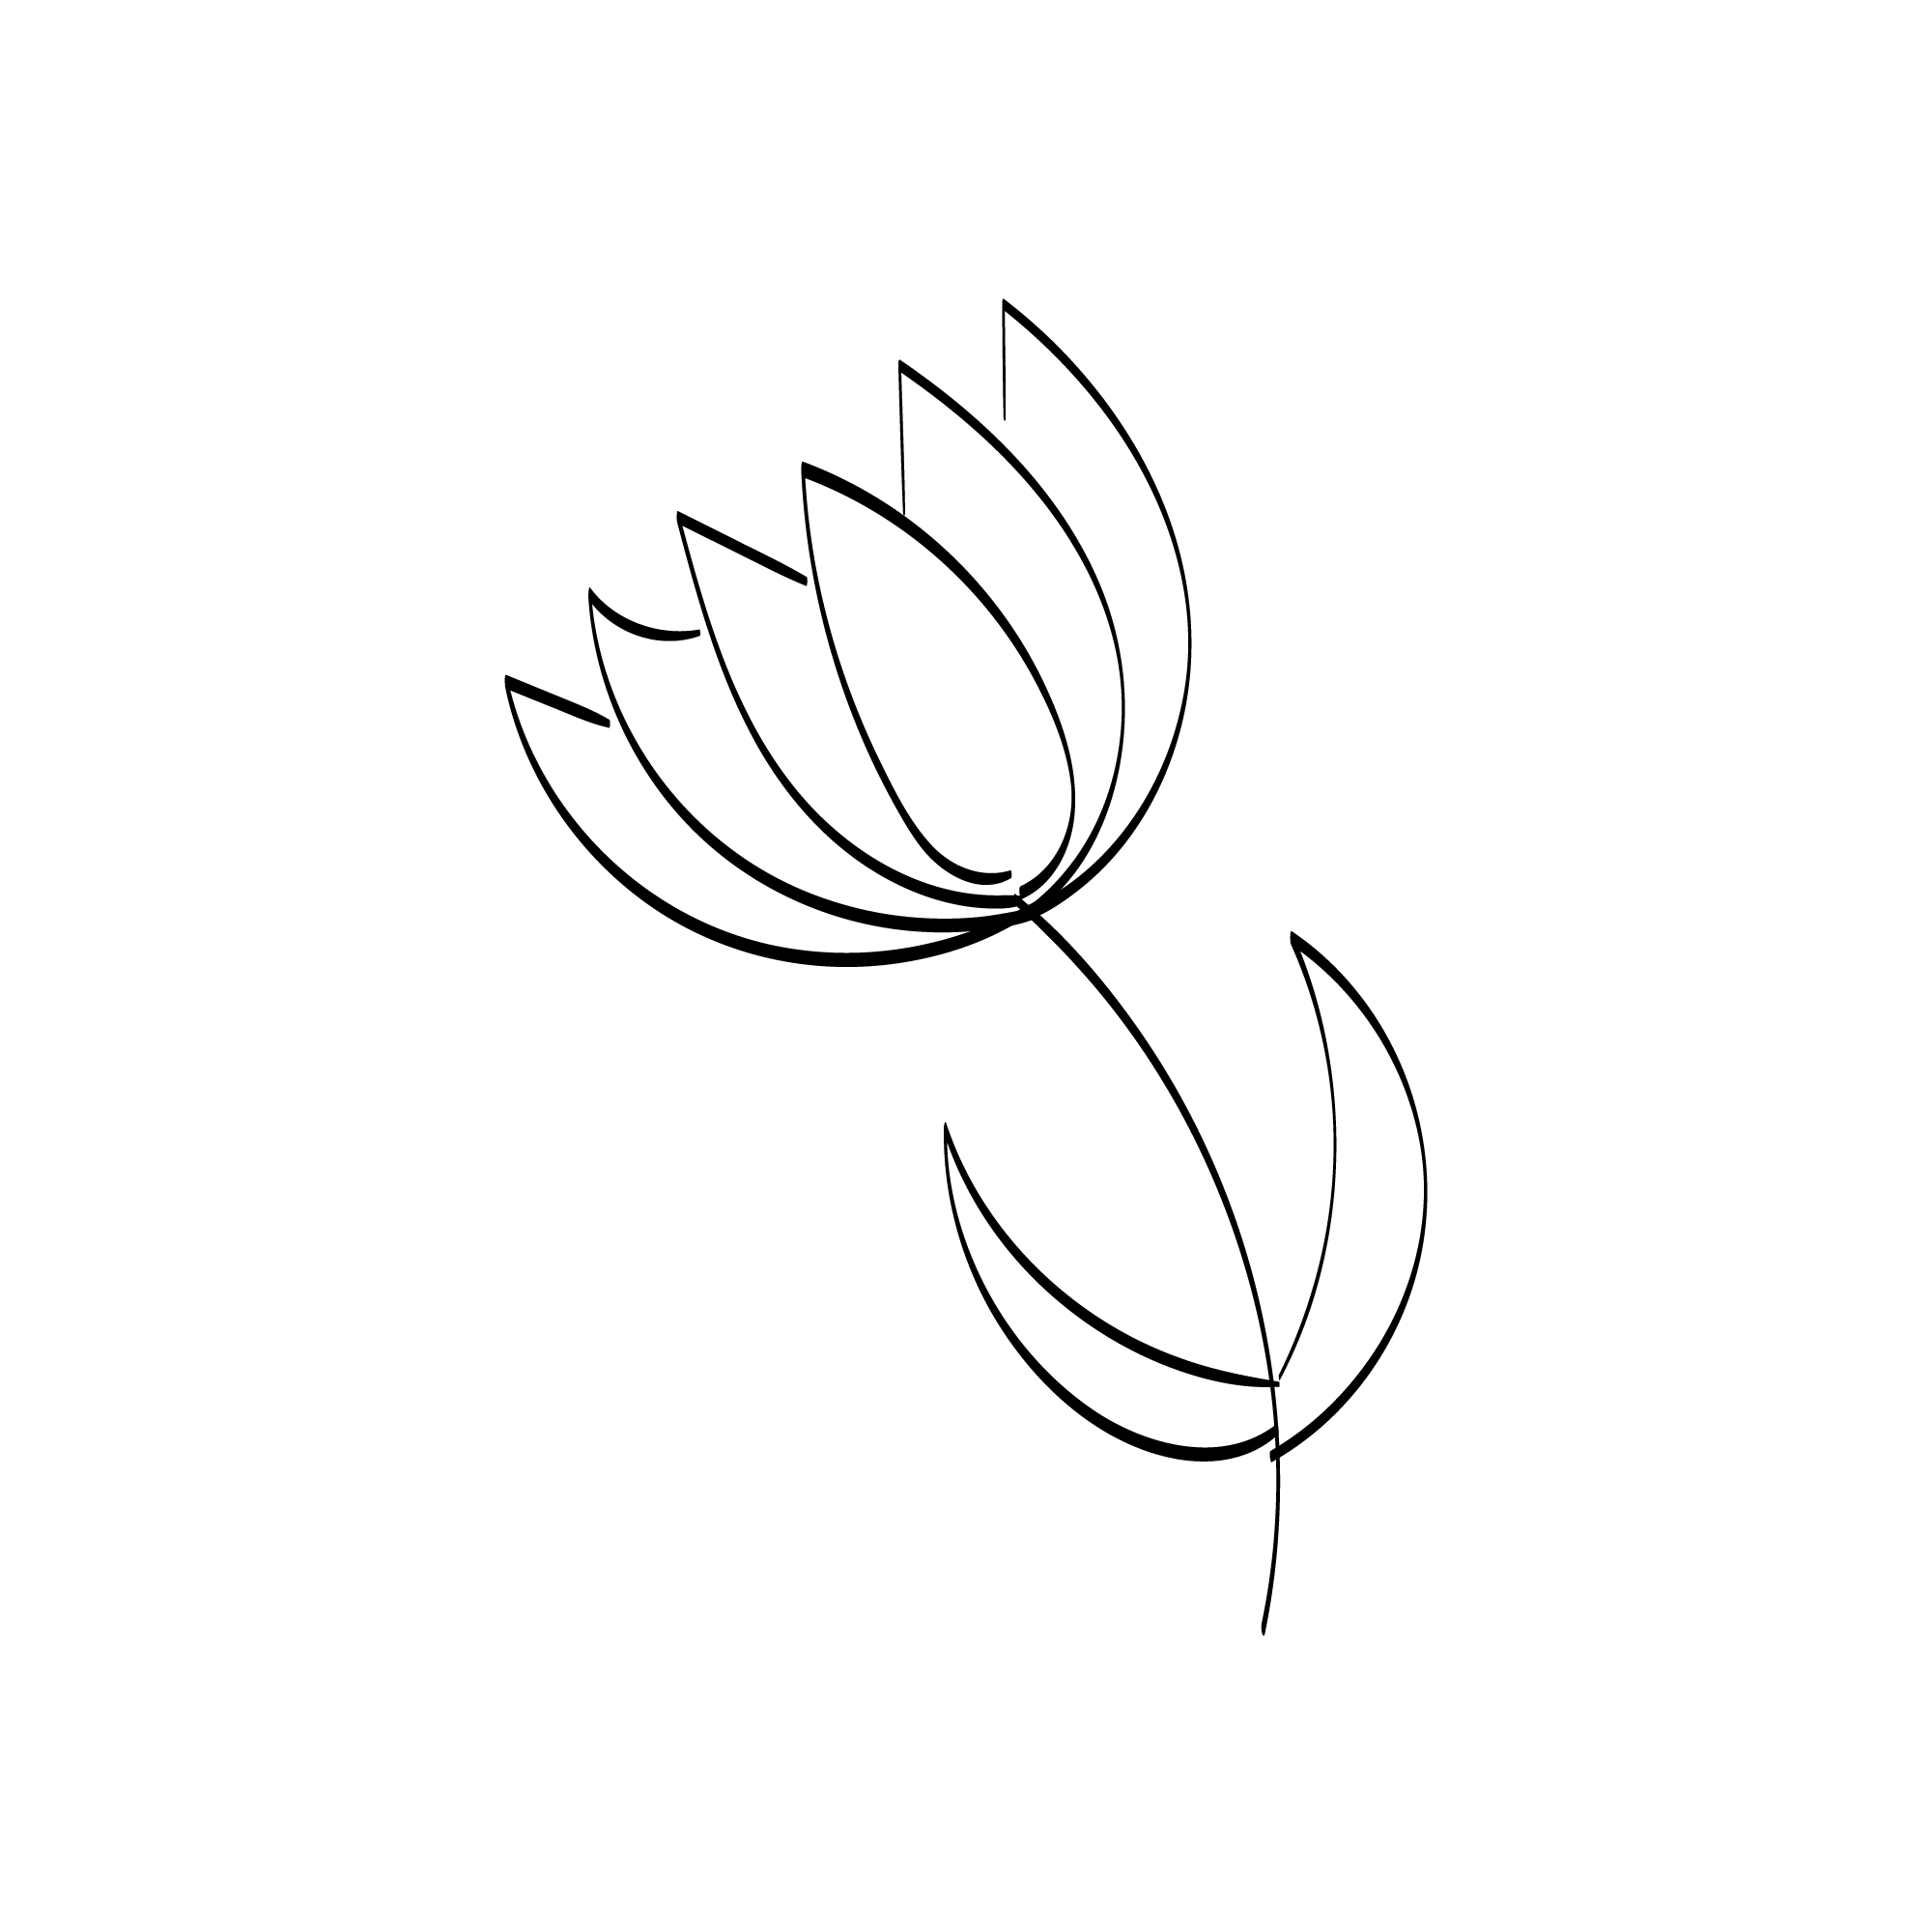 Stylish Flower Art Drawing with Line-art Preview image.